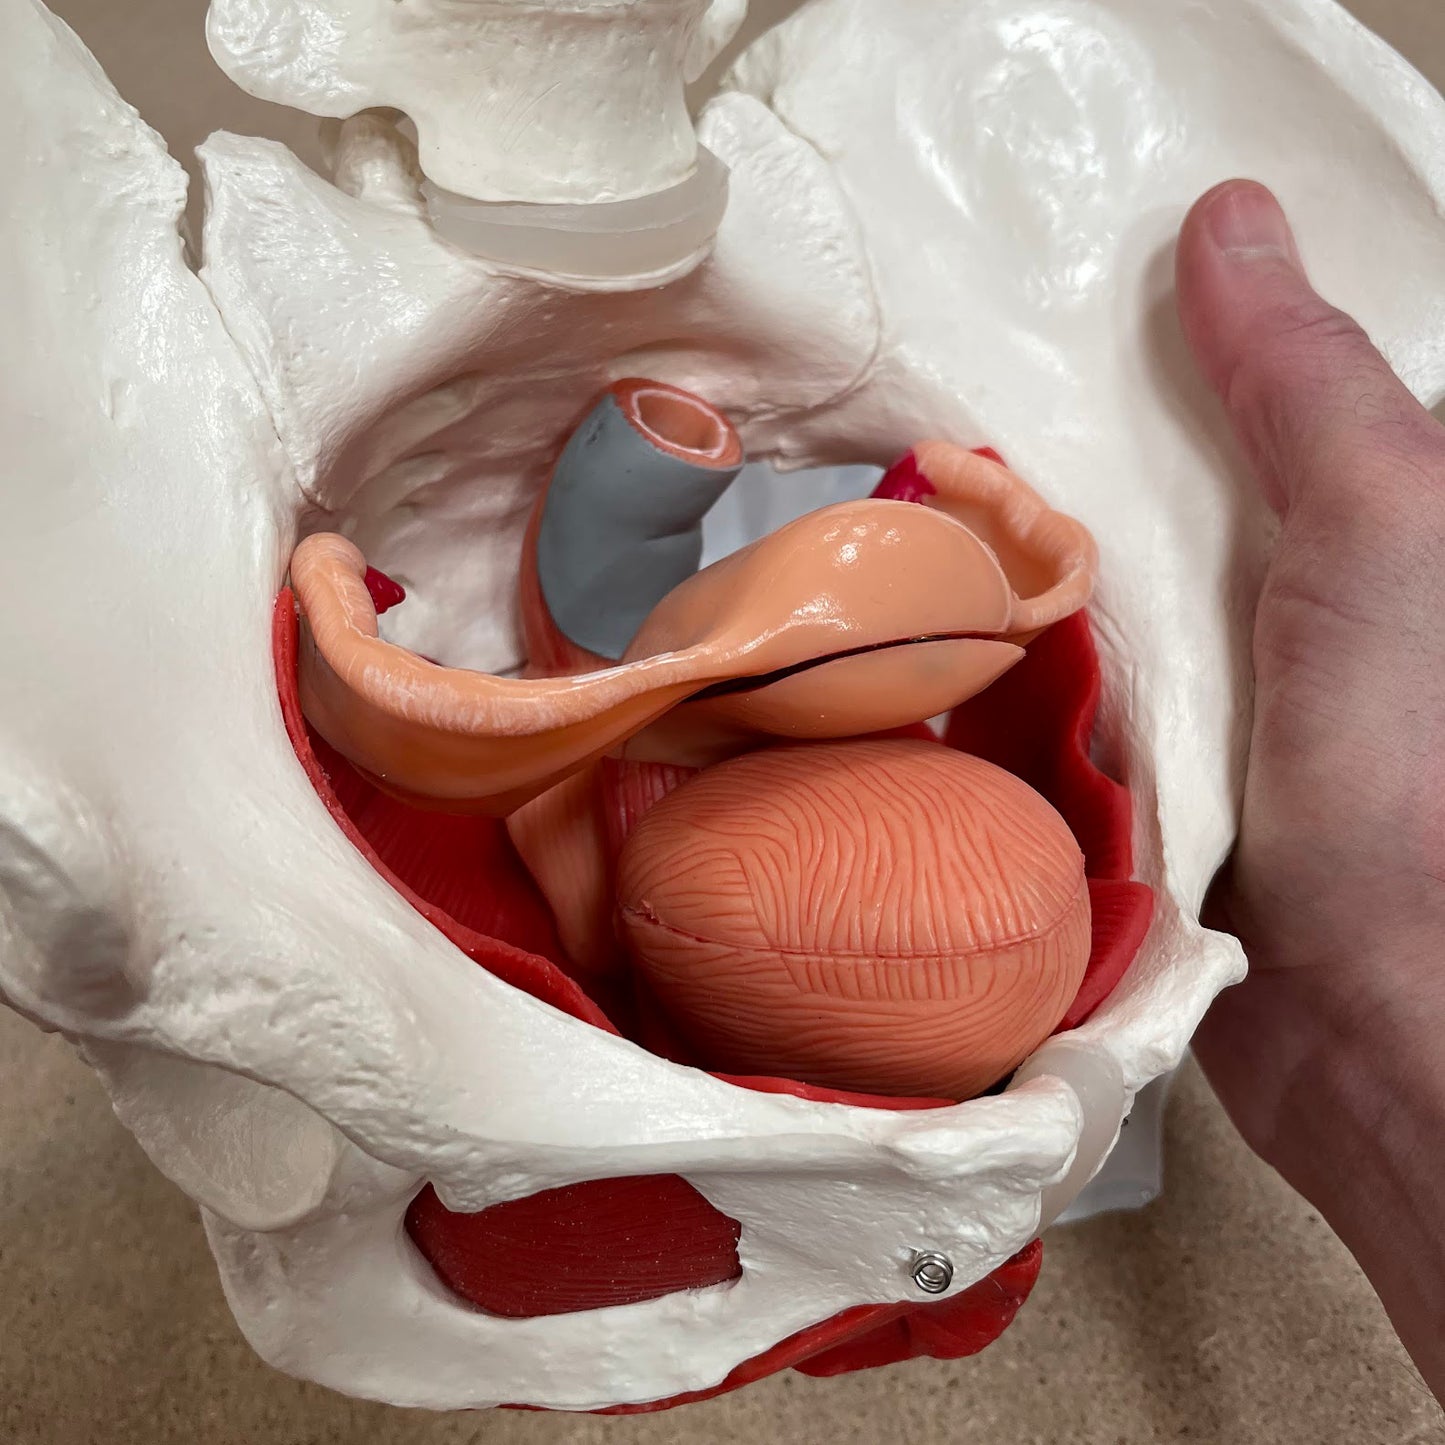 Pelvic model showing the pelvic floor, the internal and external genitalia and the female bladder